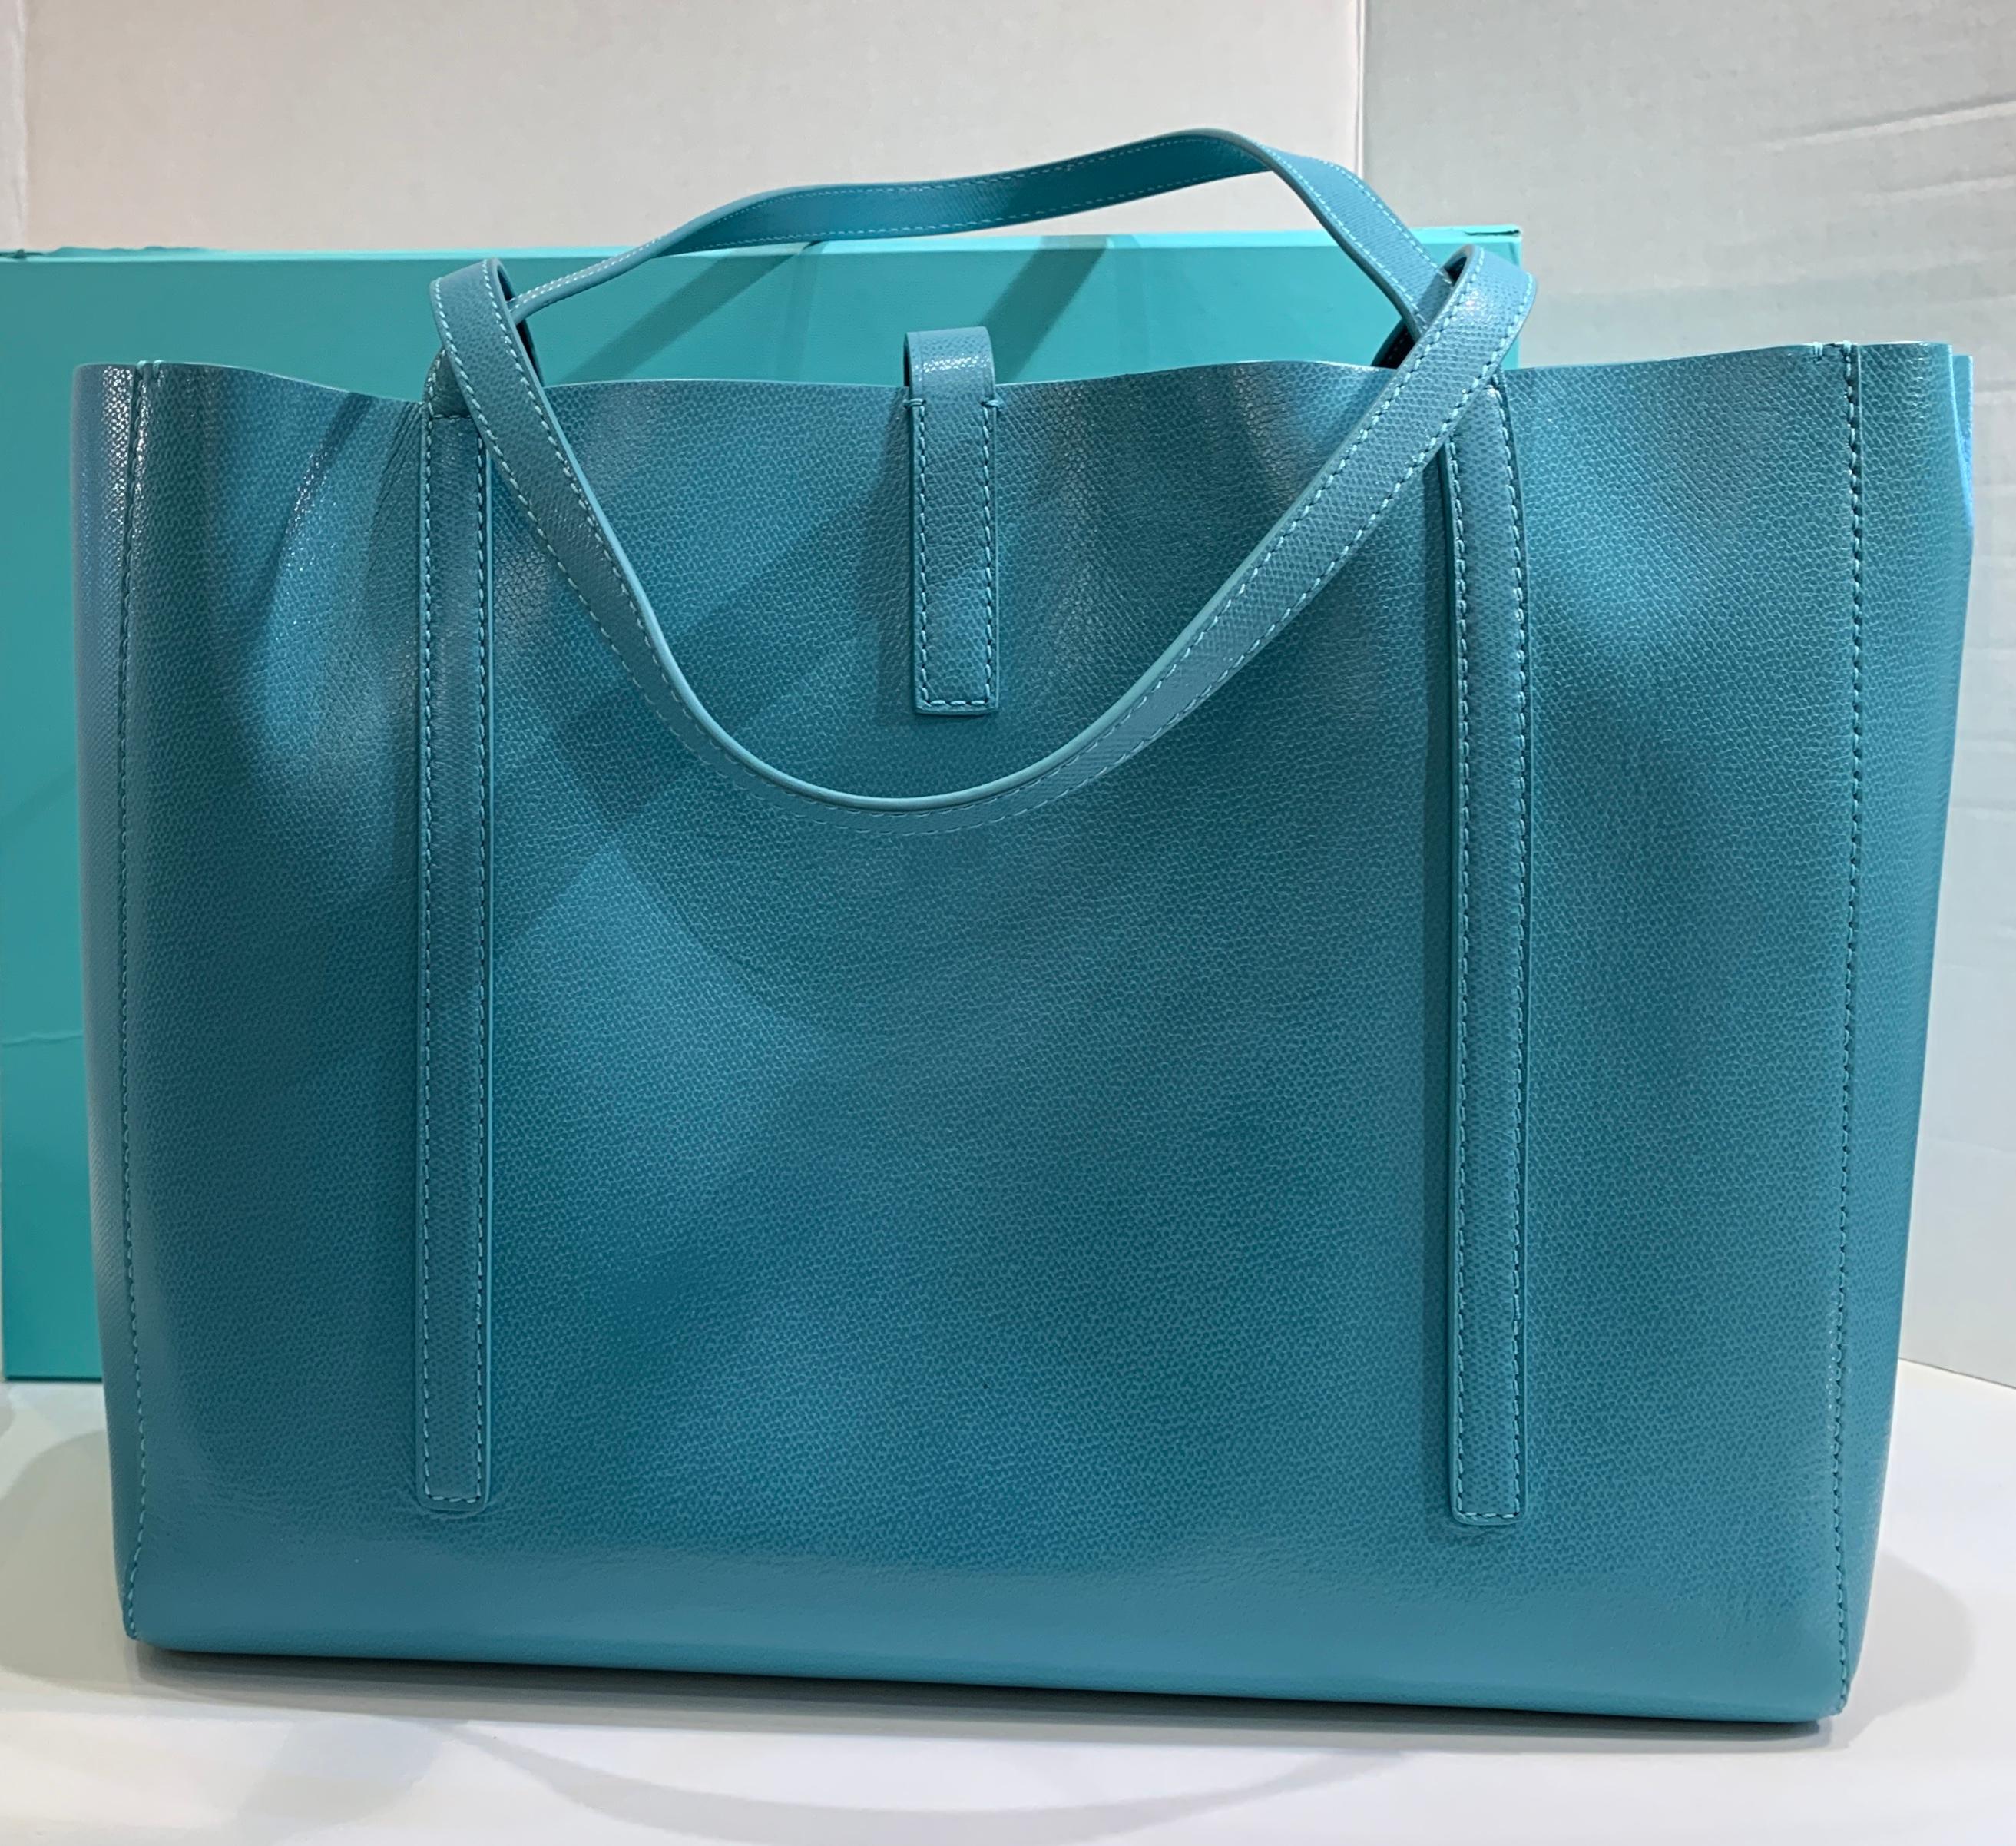 Blue Large Tiffany & Co. Textured Leather East West Tote Bag Light Teal Made in Italy